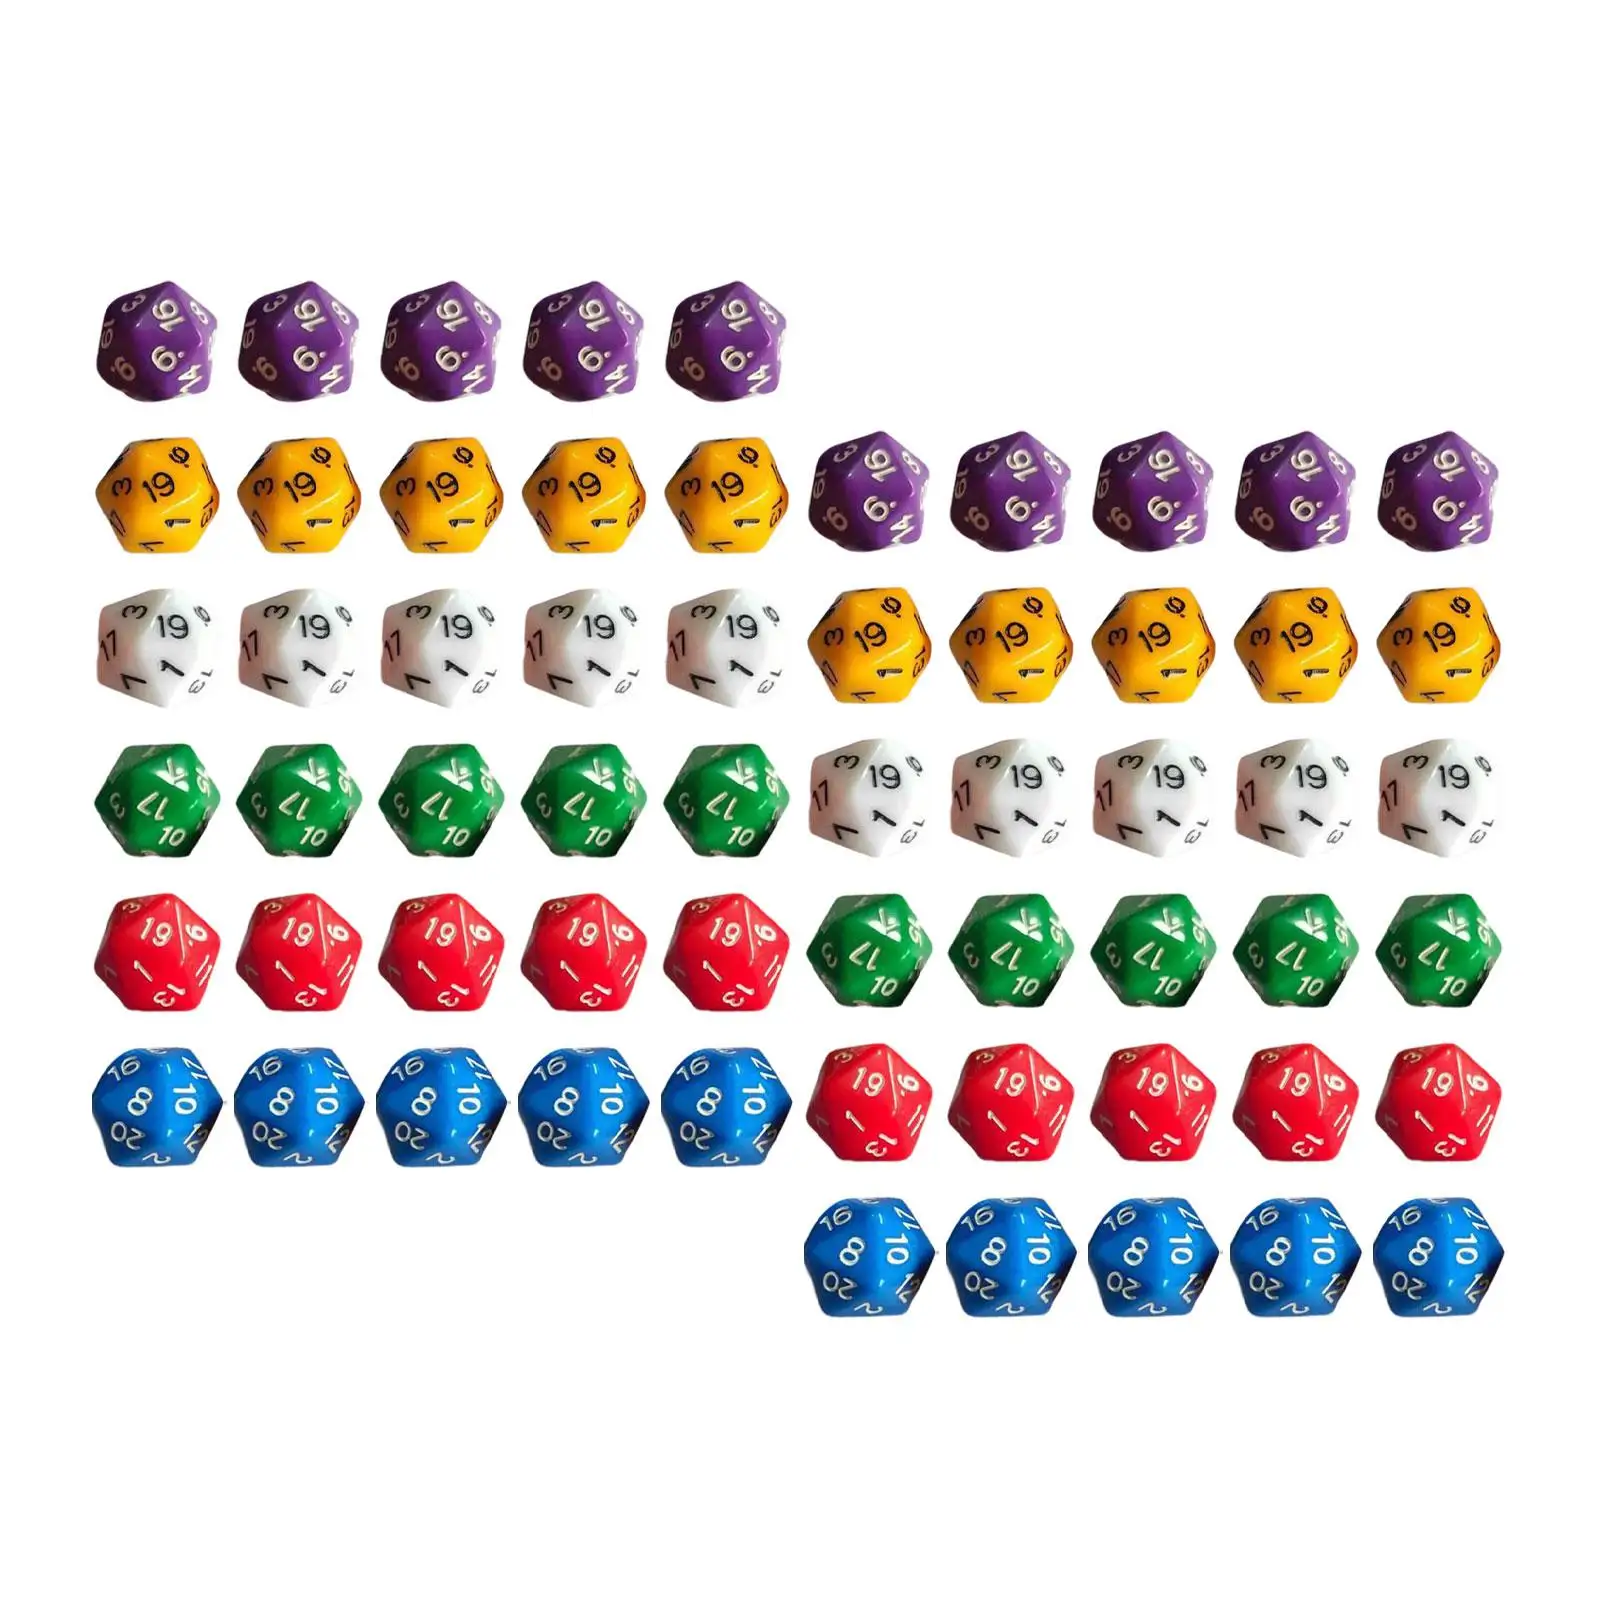 60 Pieces D20 Polyhedral Dice Party Supplies Multi Sided Dices for Table Party Game Role Playing Game Board Game Card Game